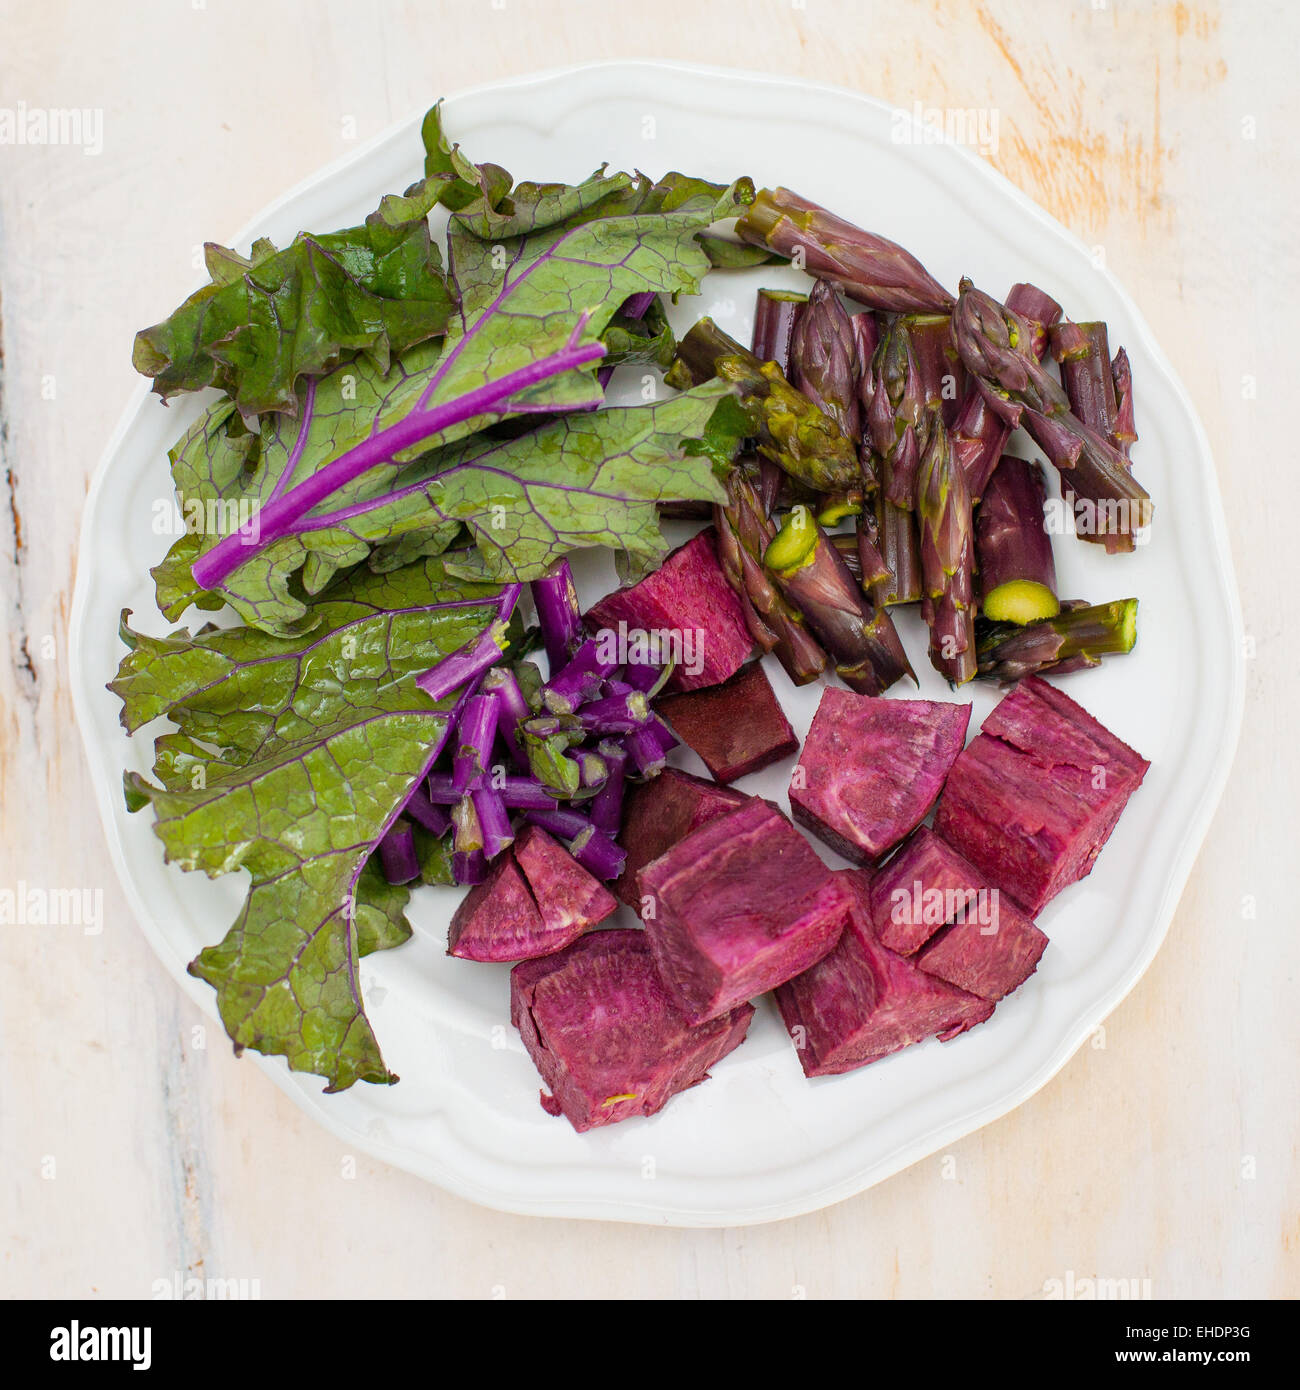 Assorted purple produce on a plate Stock Photo